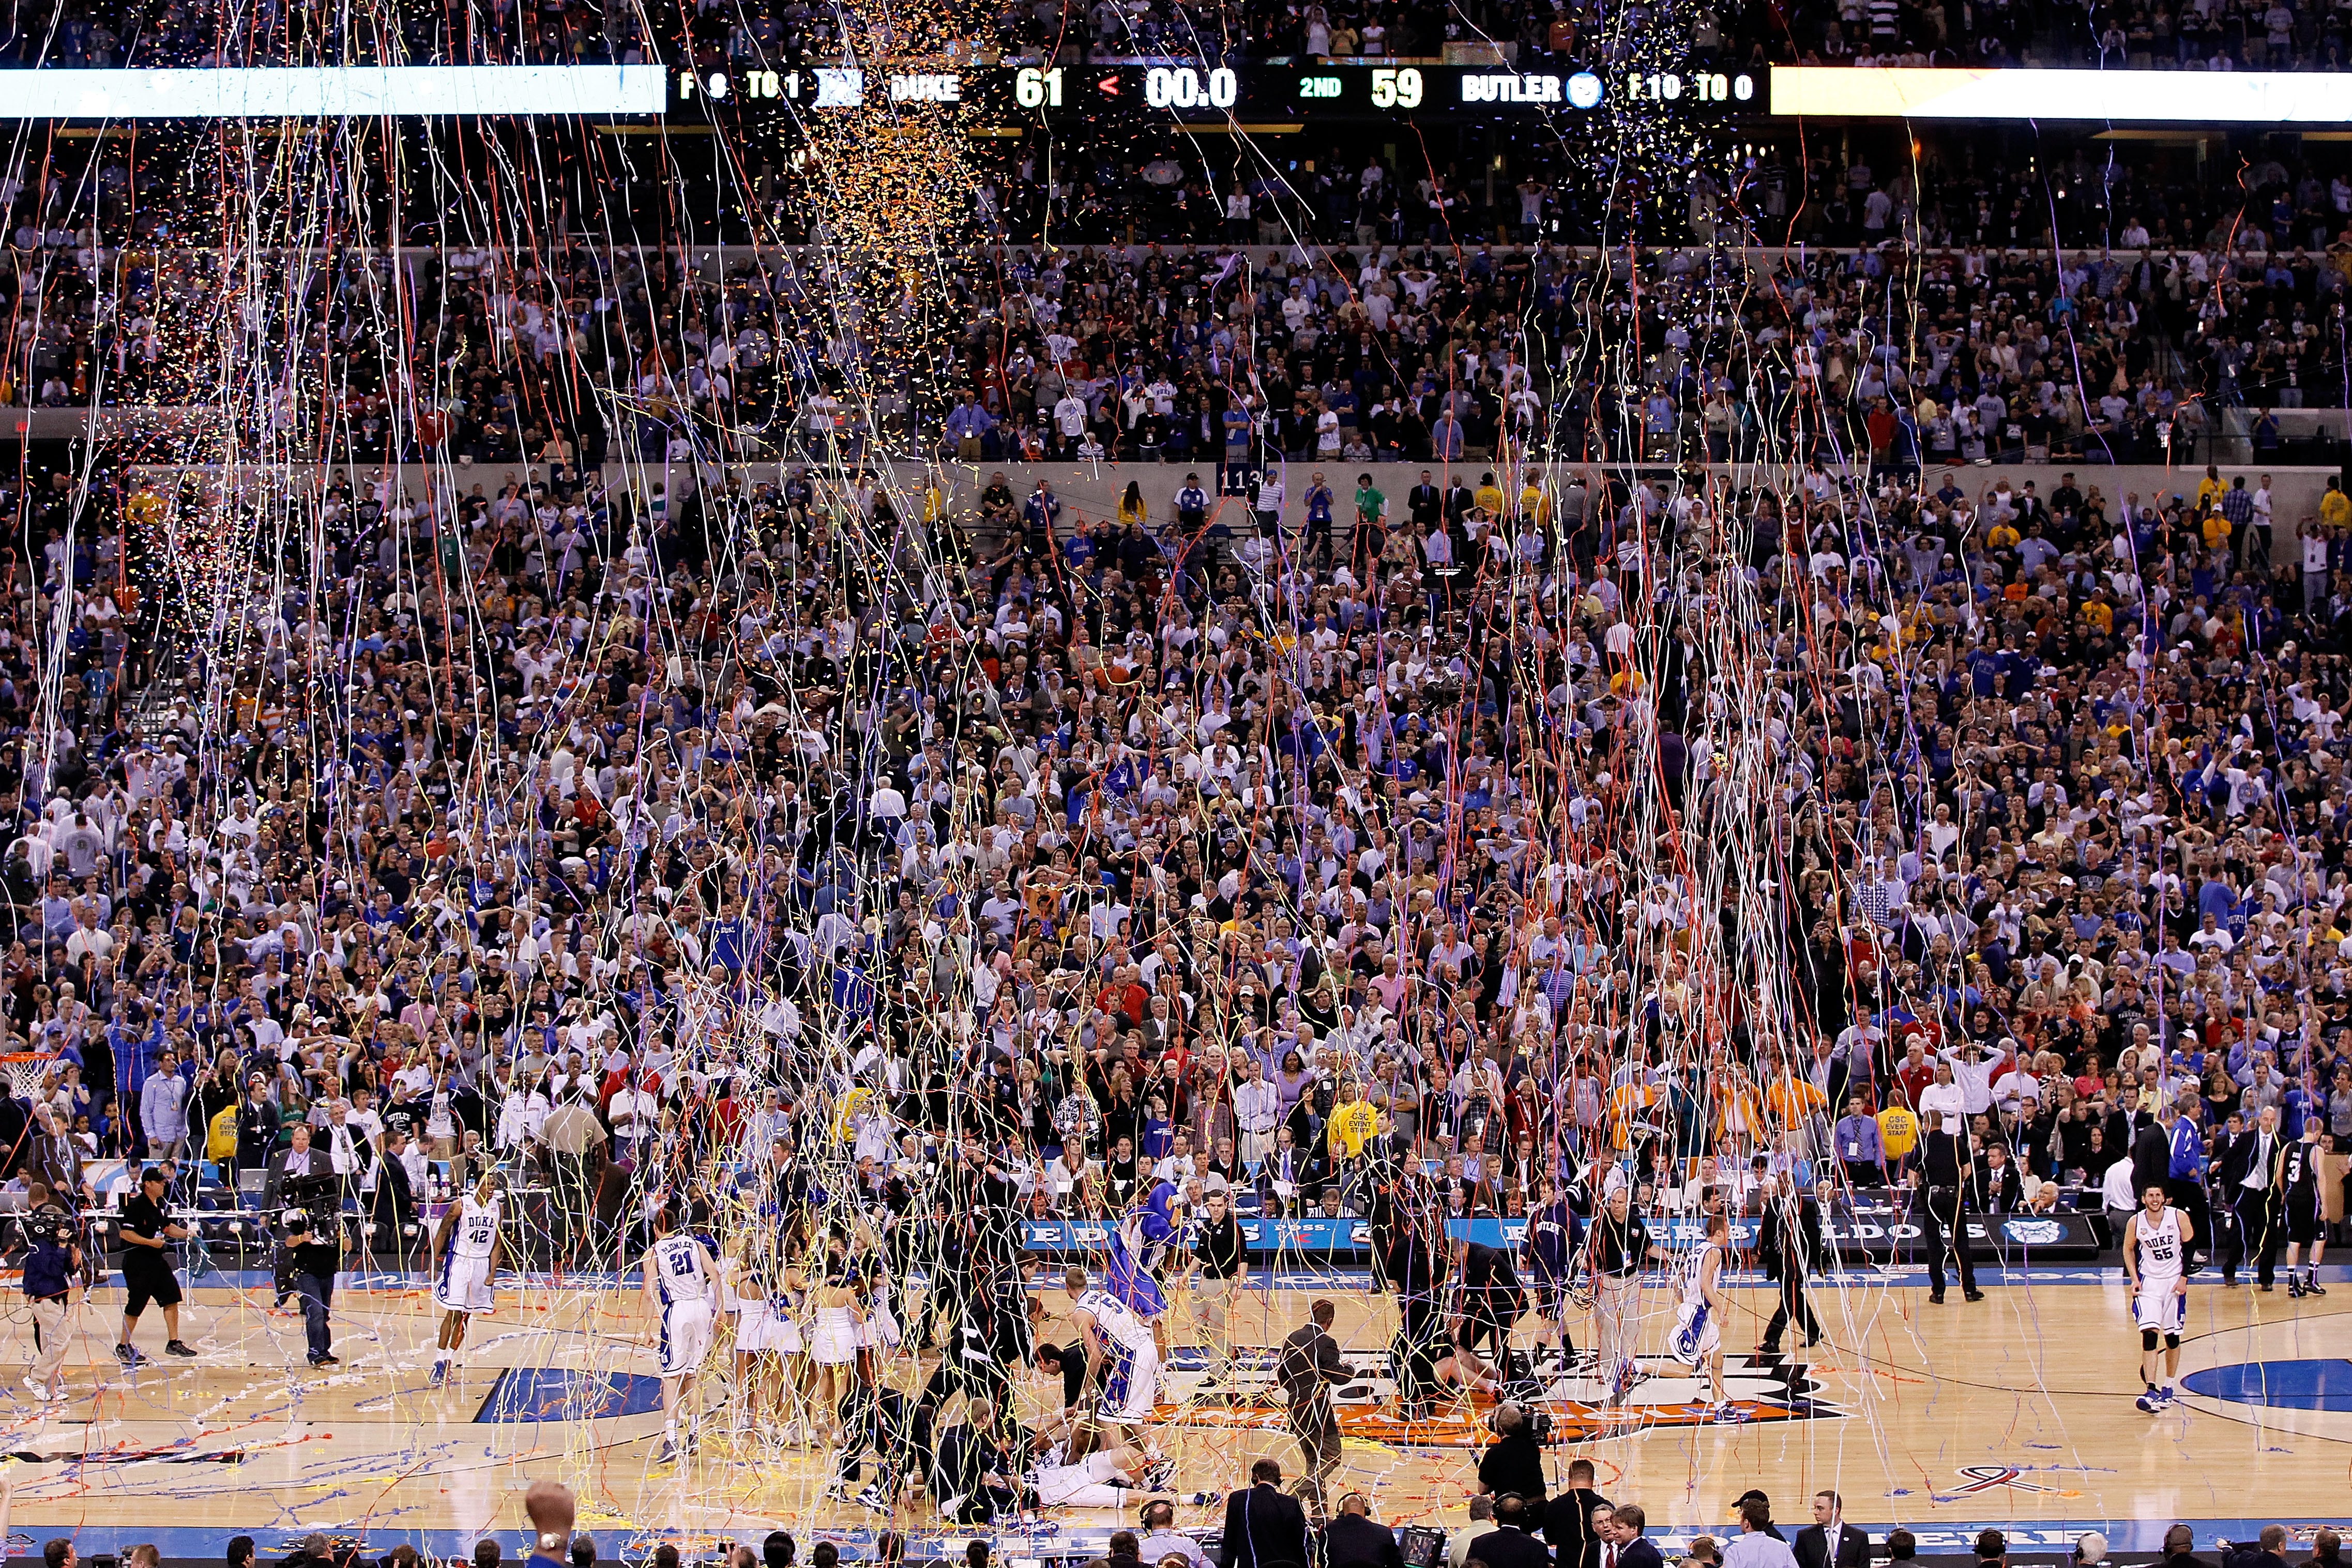 INDIANAPOLIS - APRIL 05:  Confetti falls as the Duke Blue Devils celebrate after they won 61-59 against the Butler Bulldogs during the 2010 NCAA Division I Men's Basketball National Championship game at Lucas Oil Stadium on April 5, 2010 in Indianapolis,